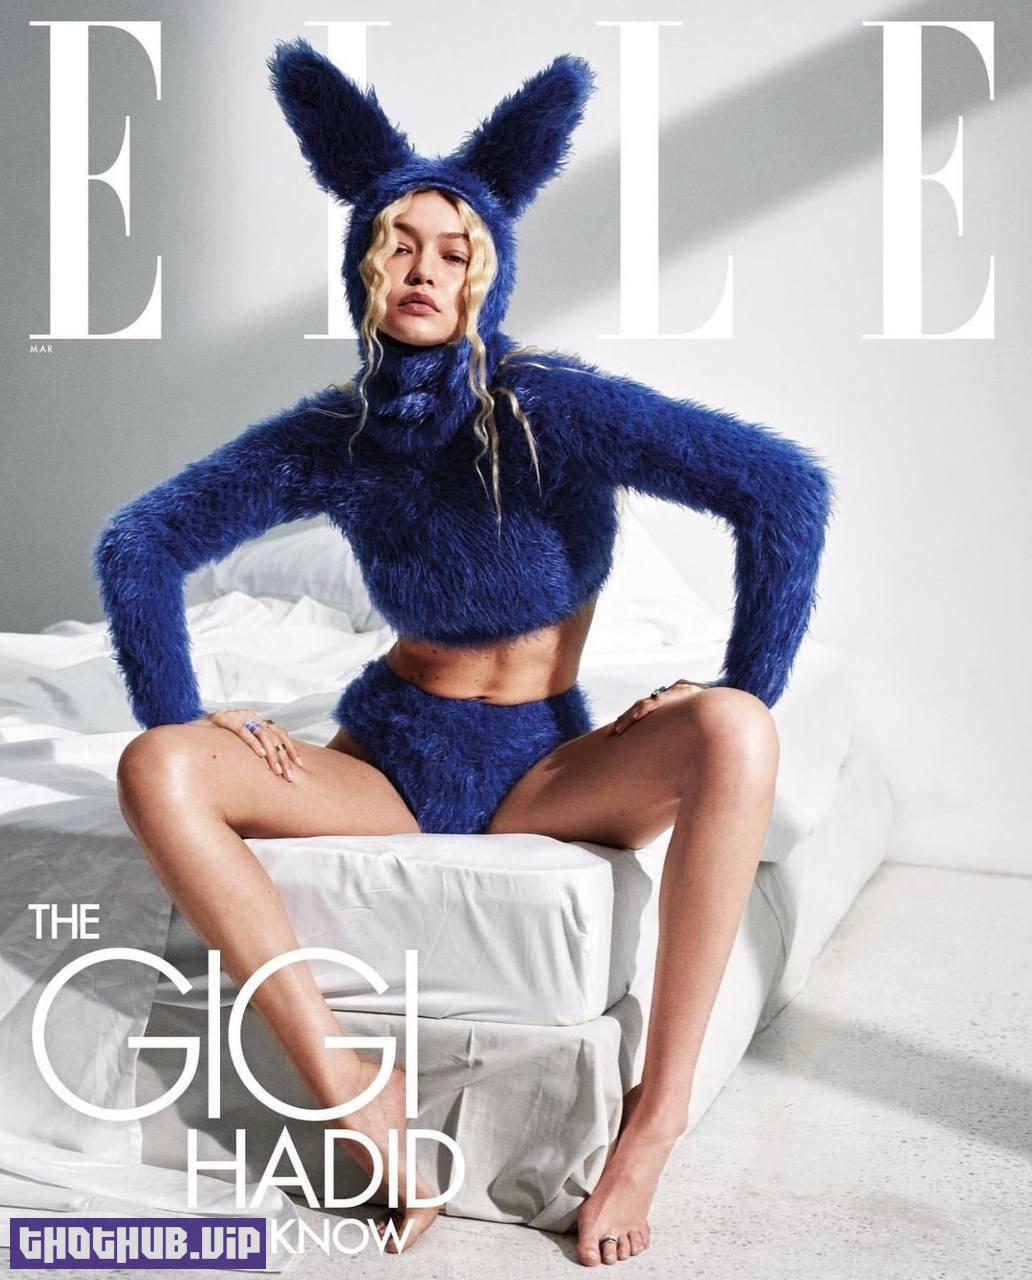 Gigi Hadid Sexy For Elle And Le Magazine (15 Photos) On Thothub pic picture